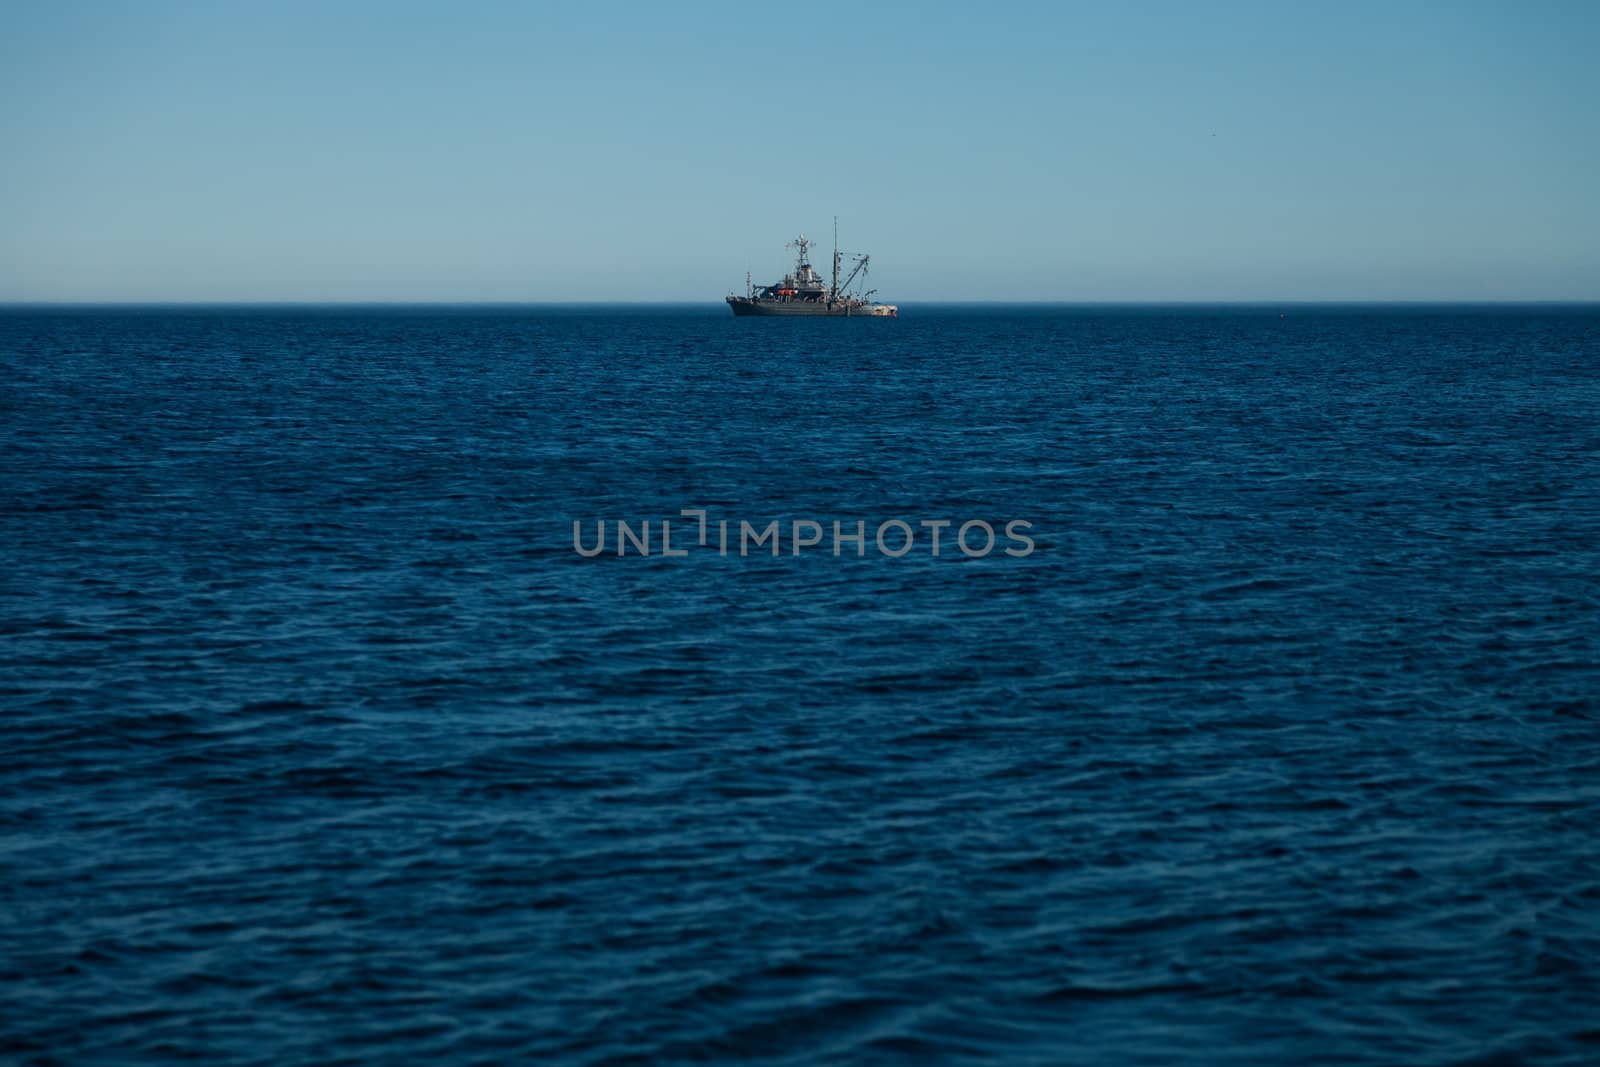 Canadian army ship in the ocean by aetb